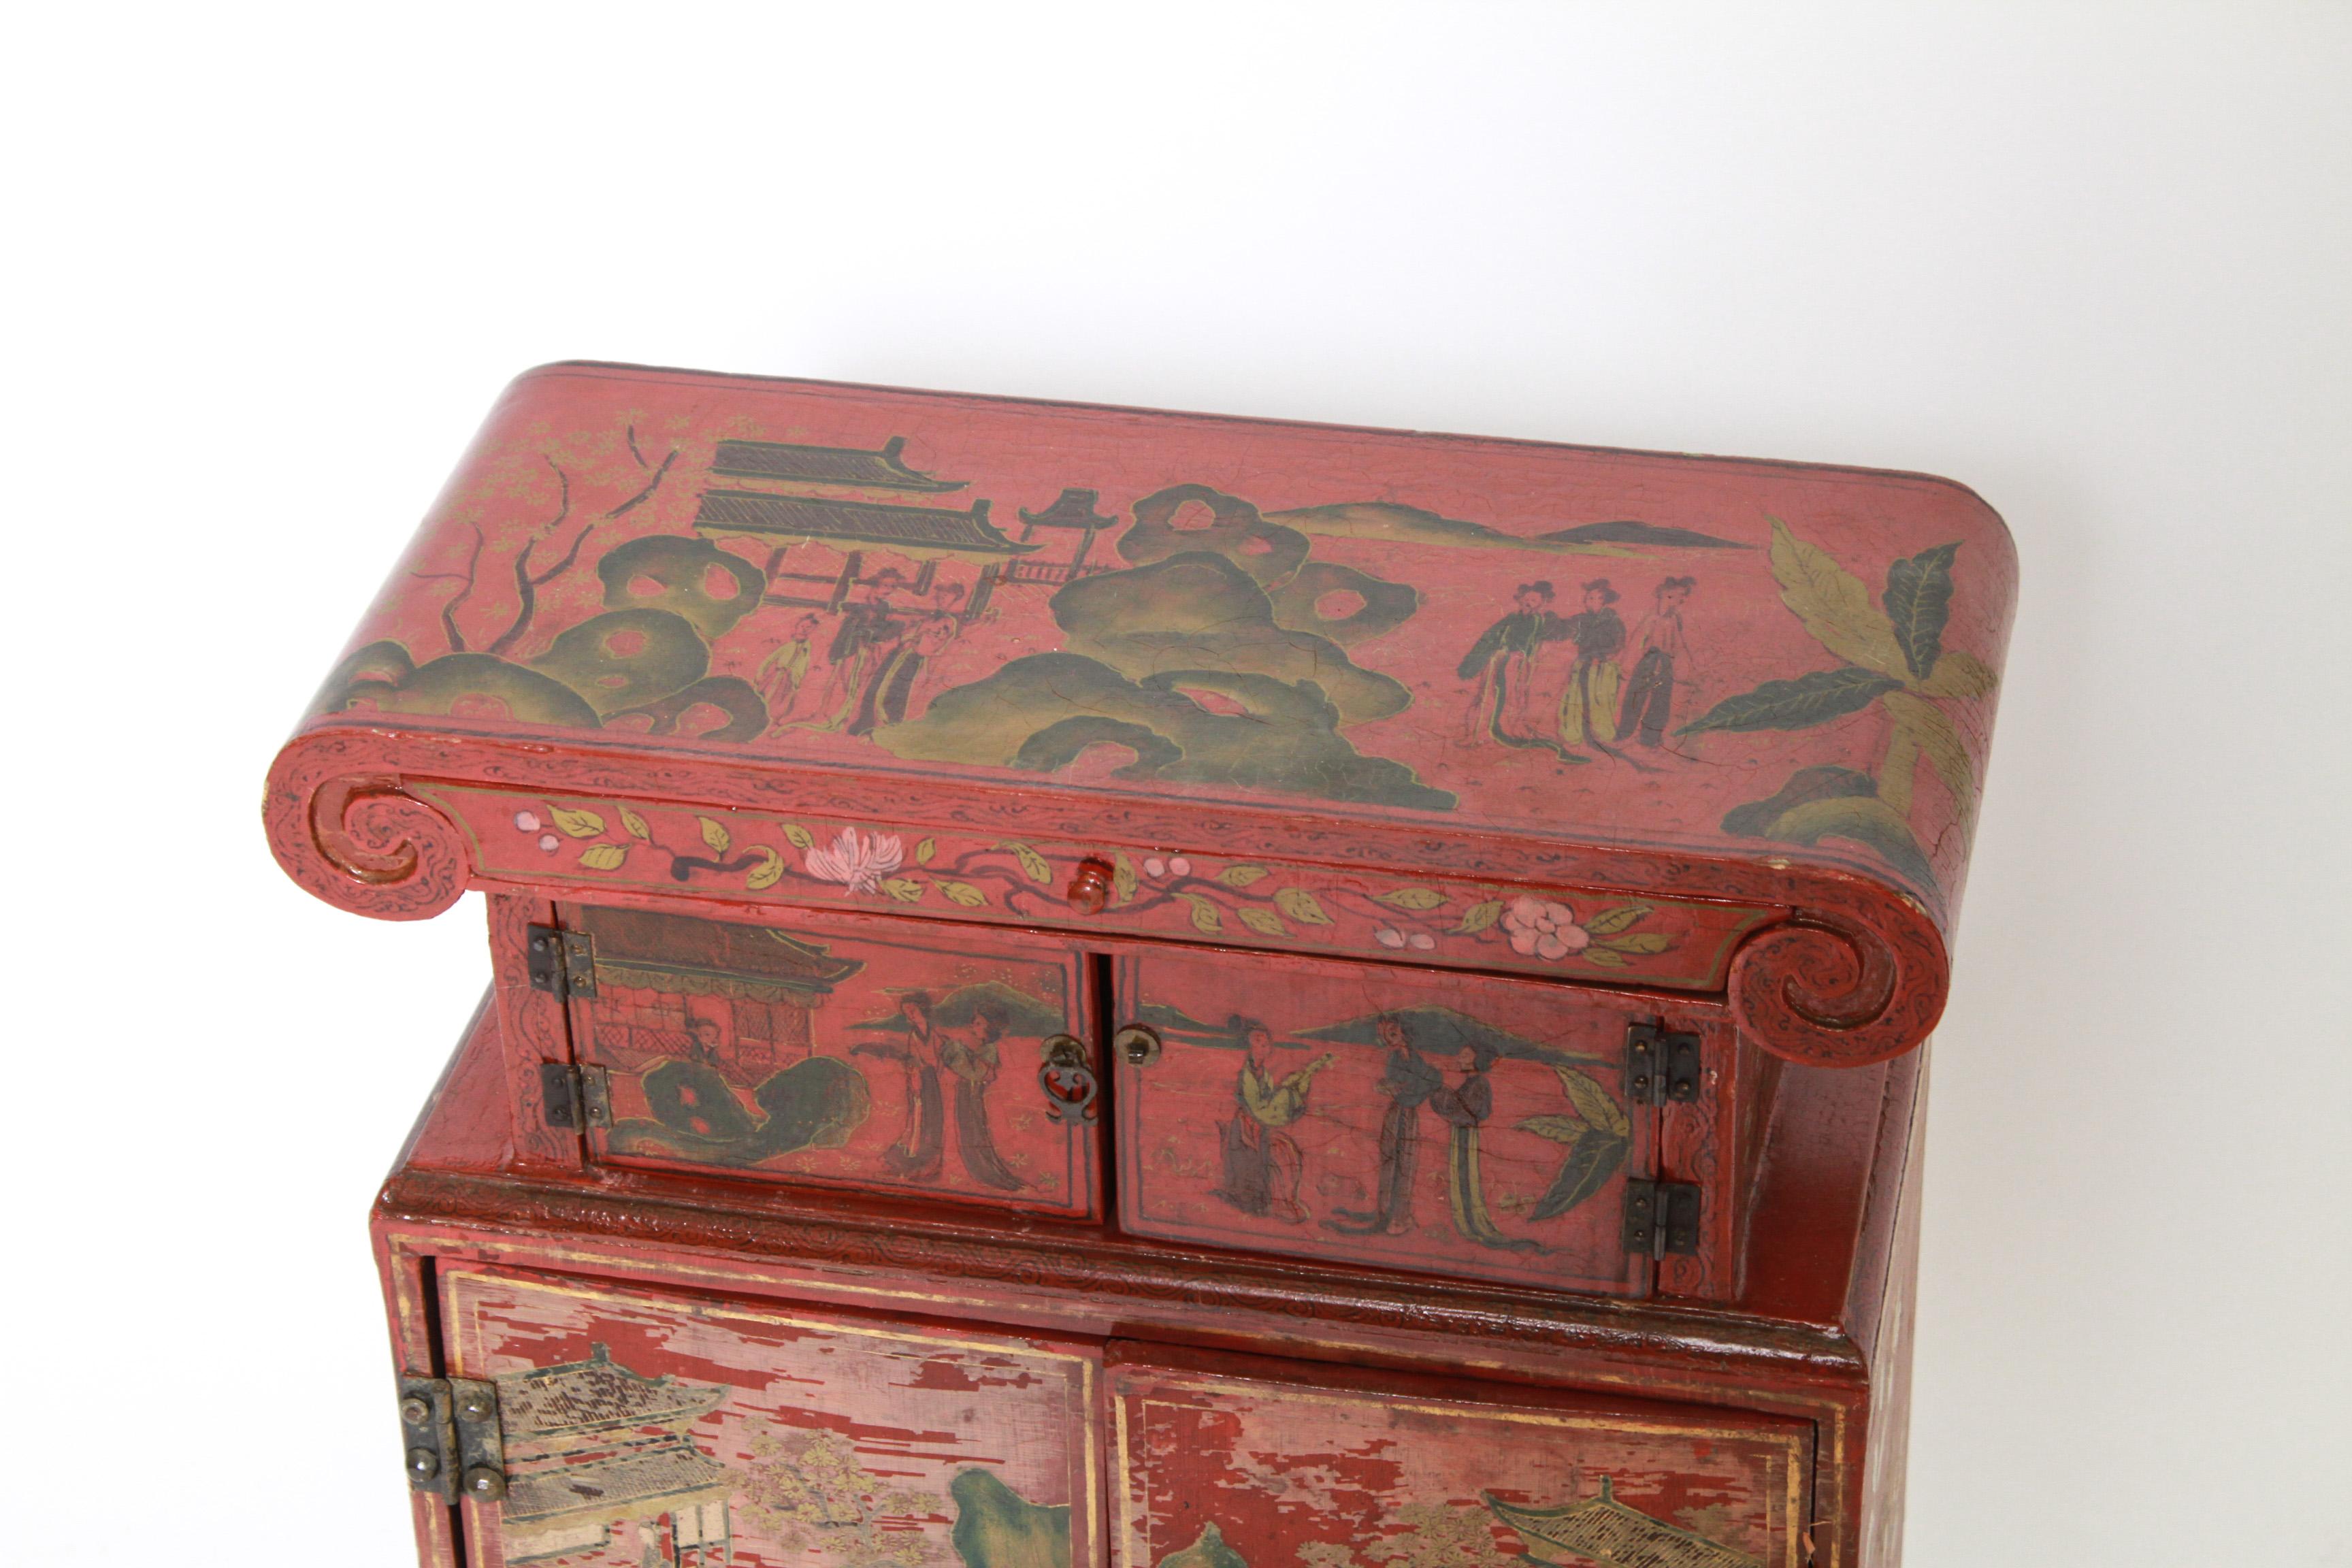 Chinoiserie red and figural painted diminutive cabinet with two small doors over two larger doors, interior drawer and one at top.
Measures: 25.5